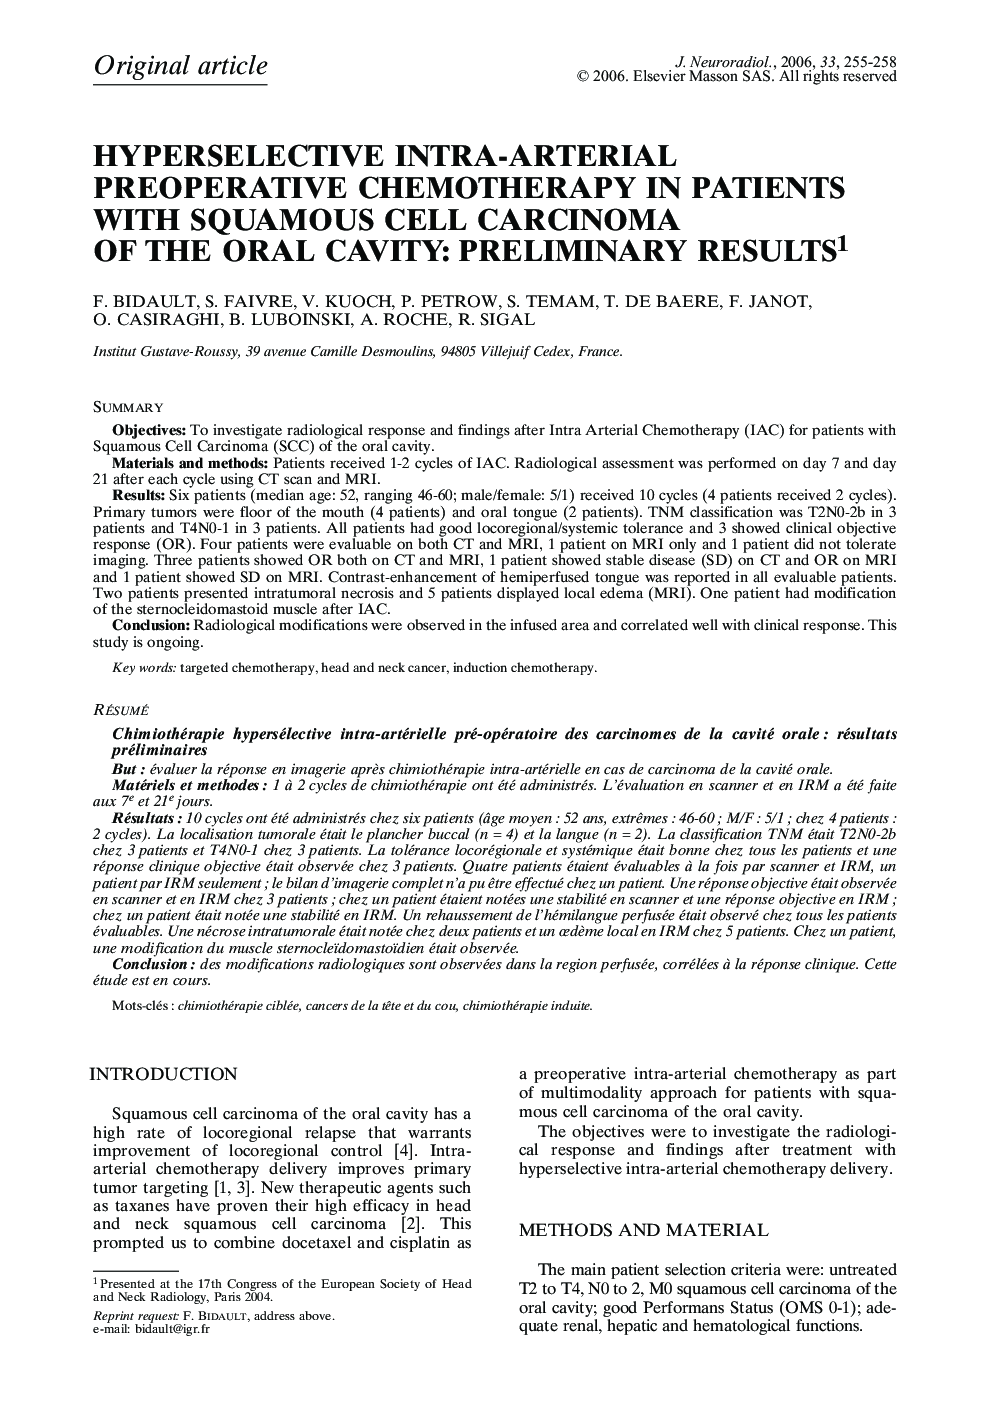 Hyperselective intra-arterial preoperative chemotherapy in patients with squamous cell carcinoma of the oral cavity: preliminary results